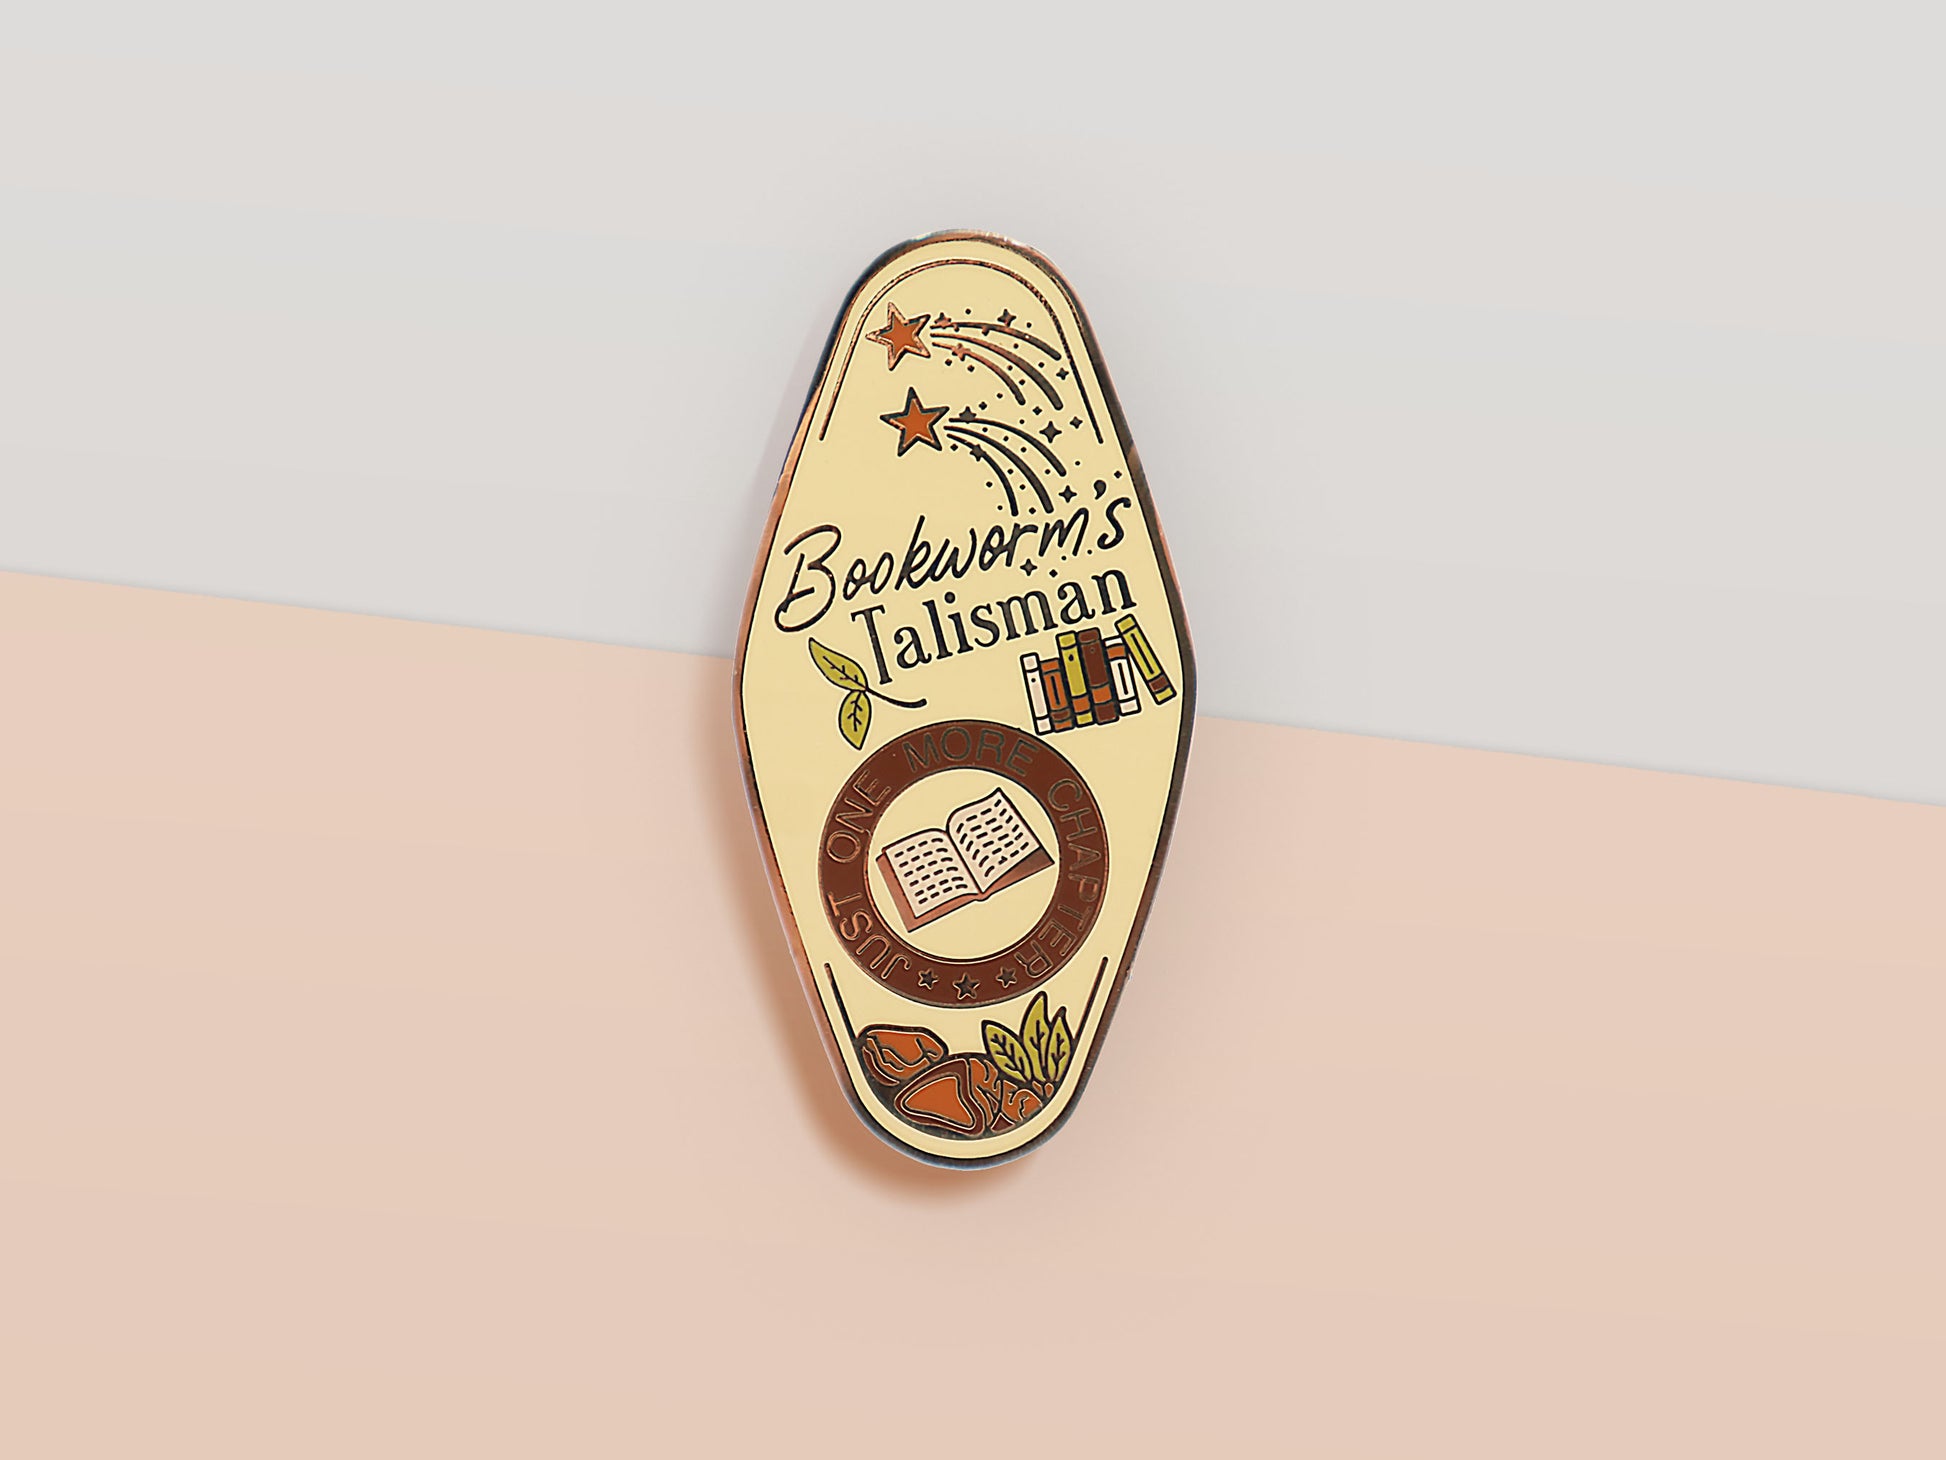 Gold Enamel Talisman Pin with lemon and brown design and the words Bookworm's Talisman, Just One More Chapter. The pins design includes open books and a book shelf, two shooting stars, as well as plants and crystals.